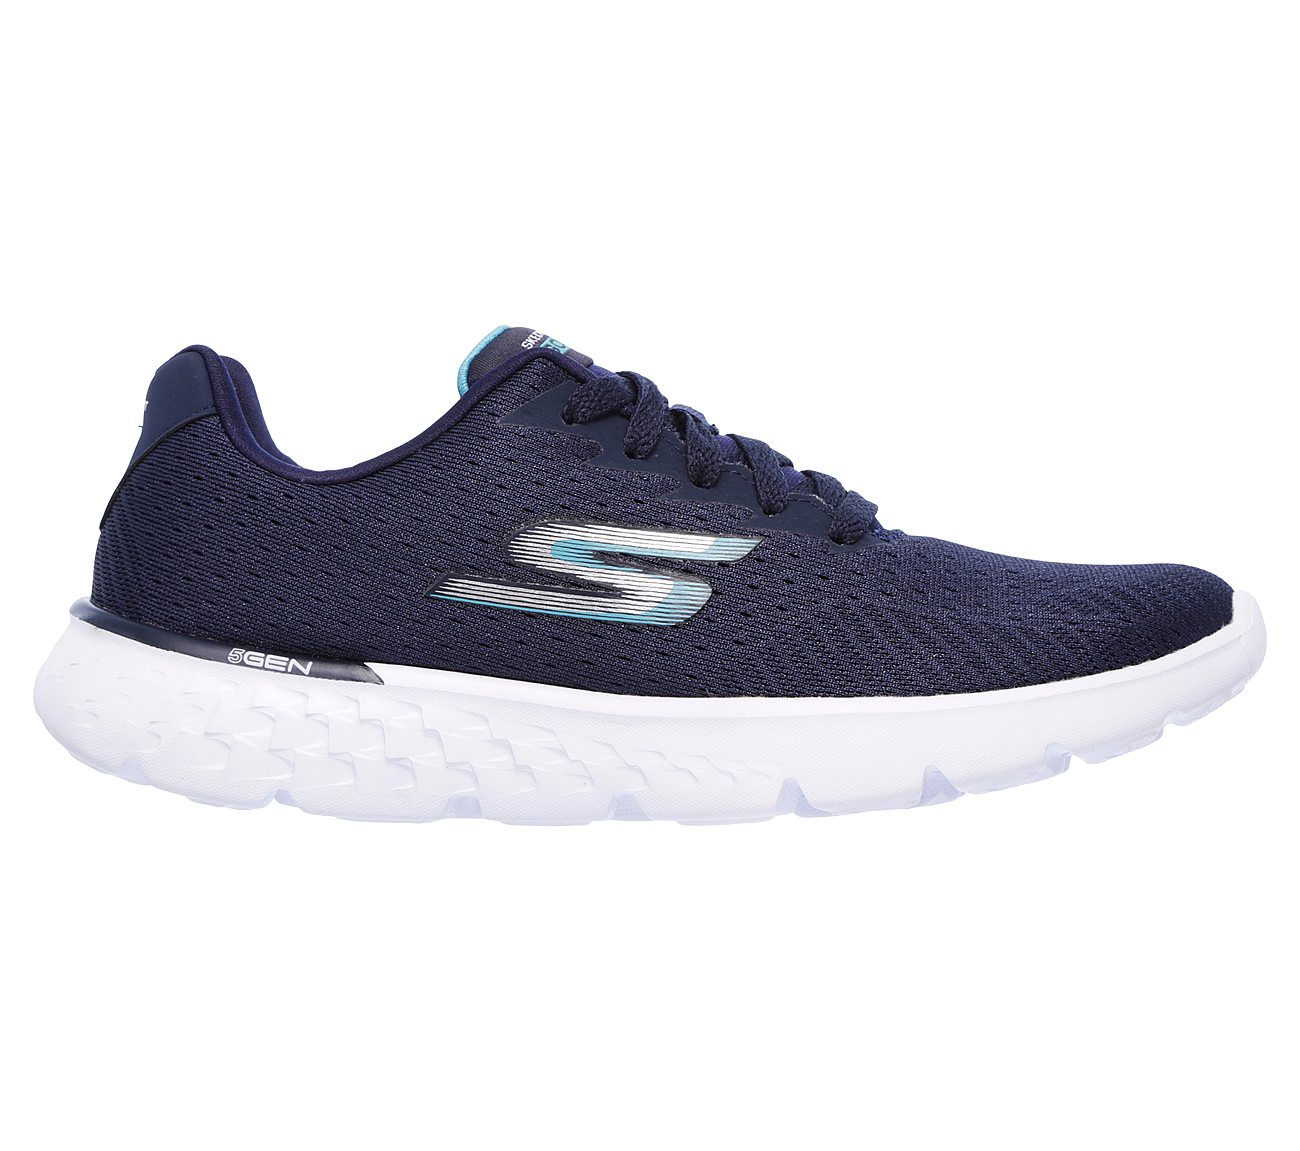 GO RUN 400 - SOLE, NAVY/WHITE Footwear Right View